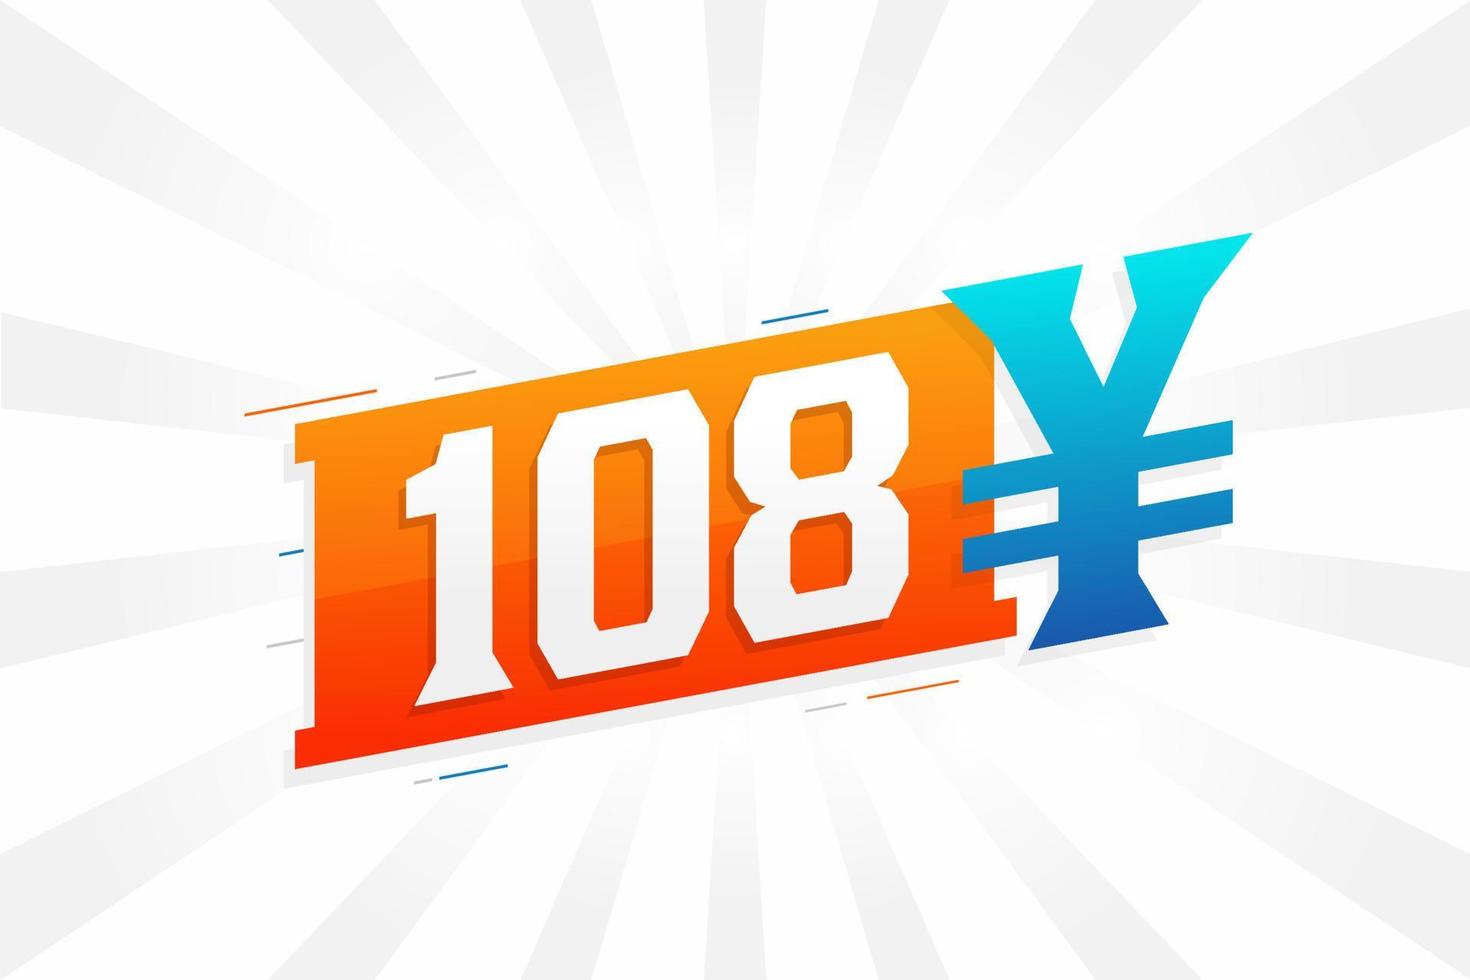 108 Yuan Chinese currency vector text symbol. 108 Yen Japanese currency Money stock vector